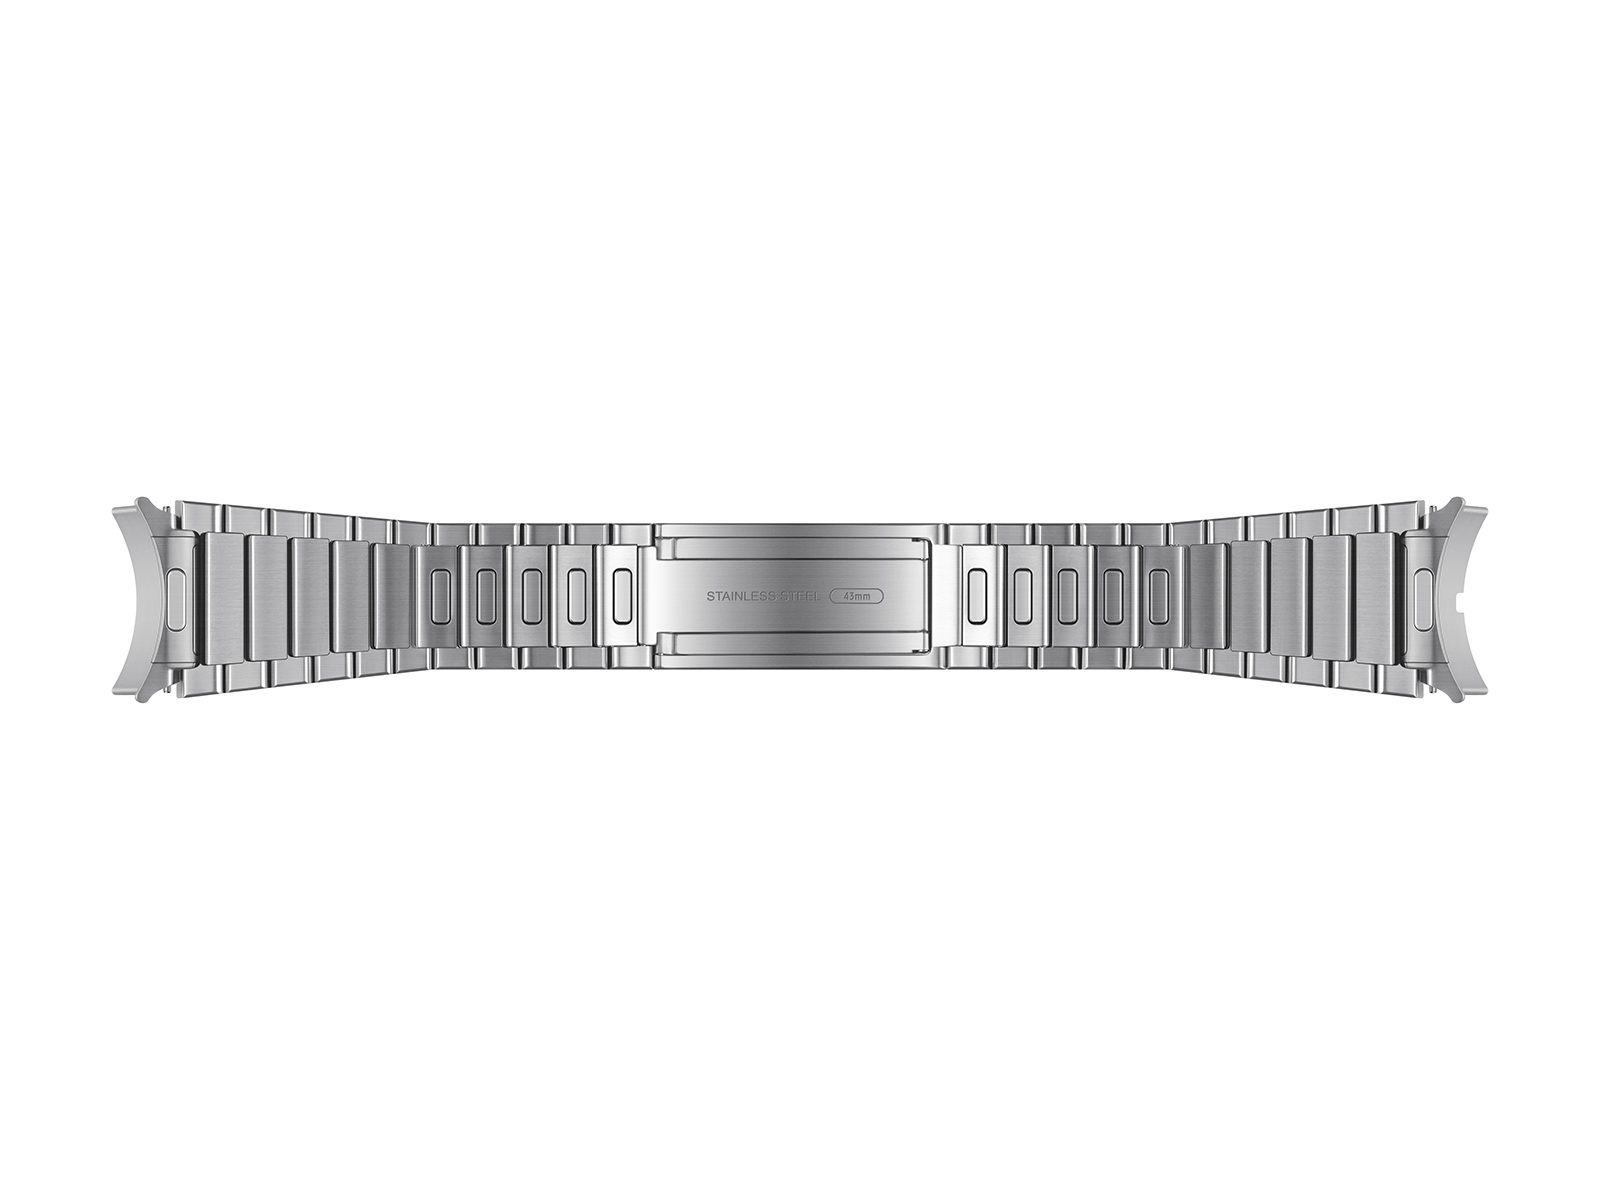 Thumbnail image of Galaxy Watch Link Bracelet Band, Small, Silver